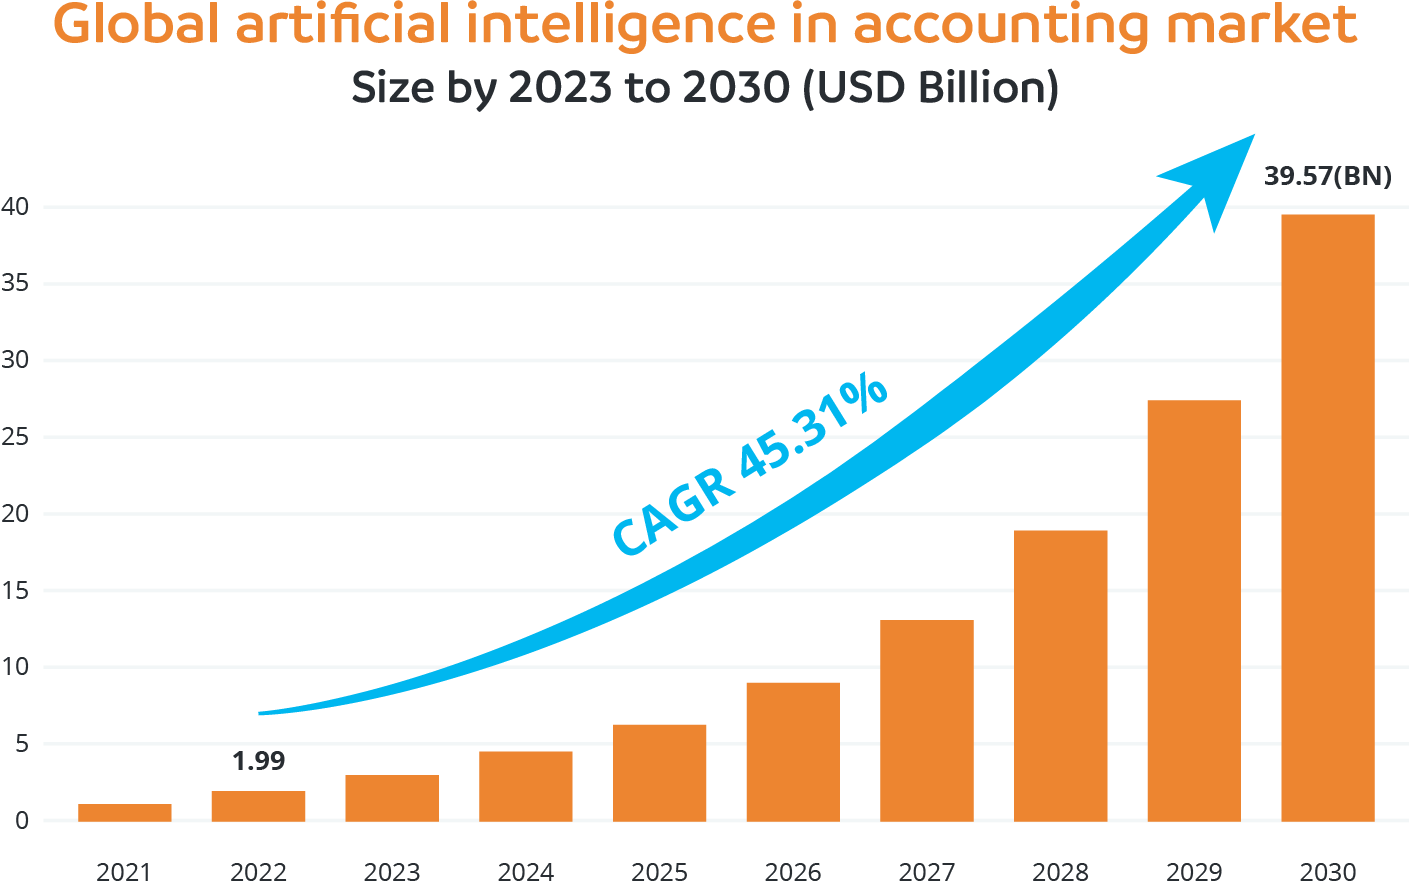 Global artificial intelligence in accounting market 2023 to 2030